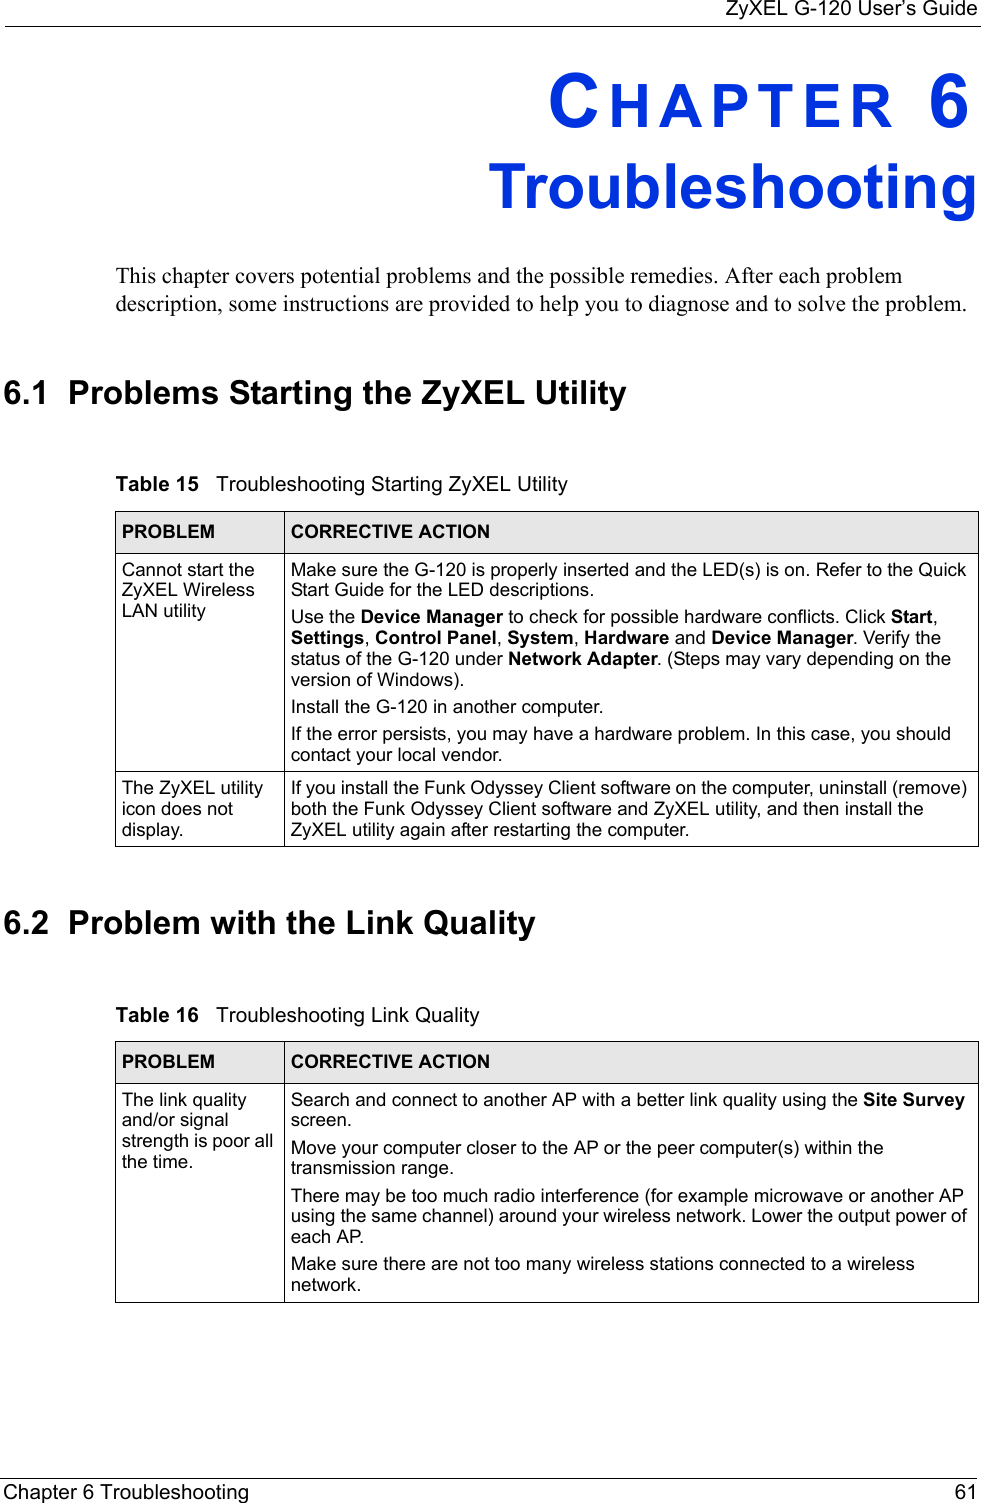 ZyXEL G-120 User’s GuideChapter 6 Troubleshooting 61CHAPTER 6   TroubleshootingThis chapter covers potential problems and the possible remedies. After each problem description, some instructions are provided to help you to diagnose and to solve the problem.6.1  Problems Starting the ZyXEL Utility 6.2  Problem with the Link QualityTable 15   Troubleshooting Starting ZyXEL Utility  PROBLEM CORRECTIVE ACTIONCannot start the ZyXEL Wireless LAN utilityMake sure the G-120 is properly inserted and the LED(s) is on. Refer to the Quick Start Guide for the LED descriptions.Use the Device Manager to check for possible hardware conflicts. Click Start, Settings, Control Panel, System, Hardware and Device Manager. Verify the status of the G-120 under Network Adapter. (Steps may vary depending on the version of Windows). Install the G-120 in another computer.If the error persists, you may have a hardware problem. In this case, you should contact your local vendor.The ZyXEL utility icon does not display.If you install the Funk Odyssey Client software on the computer, uninstall (remove) both the Funk Odyssey Client software and ZyXEL utility, and then install the ZyXEL utility again after restarting the computer.Table 16   Troubleshooting Link Quality PROBLEM CORRECTIVE ACTIONThe link quality and/or signal strength is poor all the time.Search and connect to another AP with a better link quality using the Site Survey screen.Move your computer closer to the AP or the peer computer(s) within the transmission range.There may be too much radio interference (for example microwave or another AP using the same channel) around your wireless network. Lower the output power of each AP.Make sure there are not too many wireless stations connected to a wireless network.